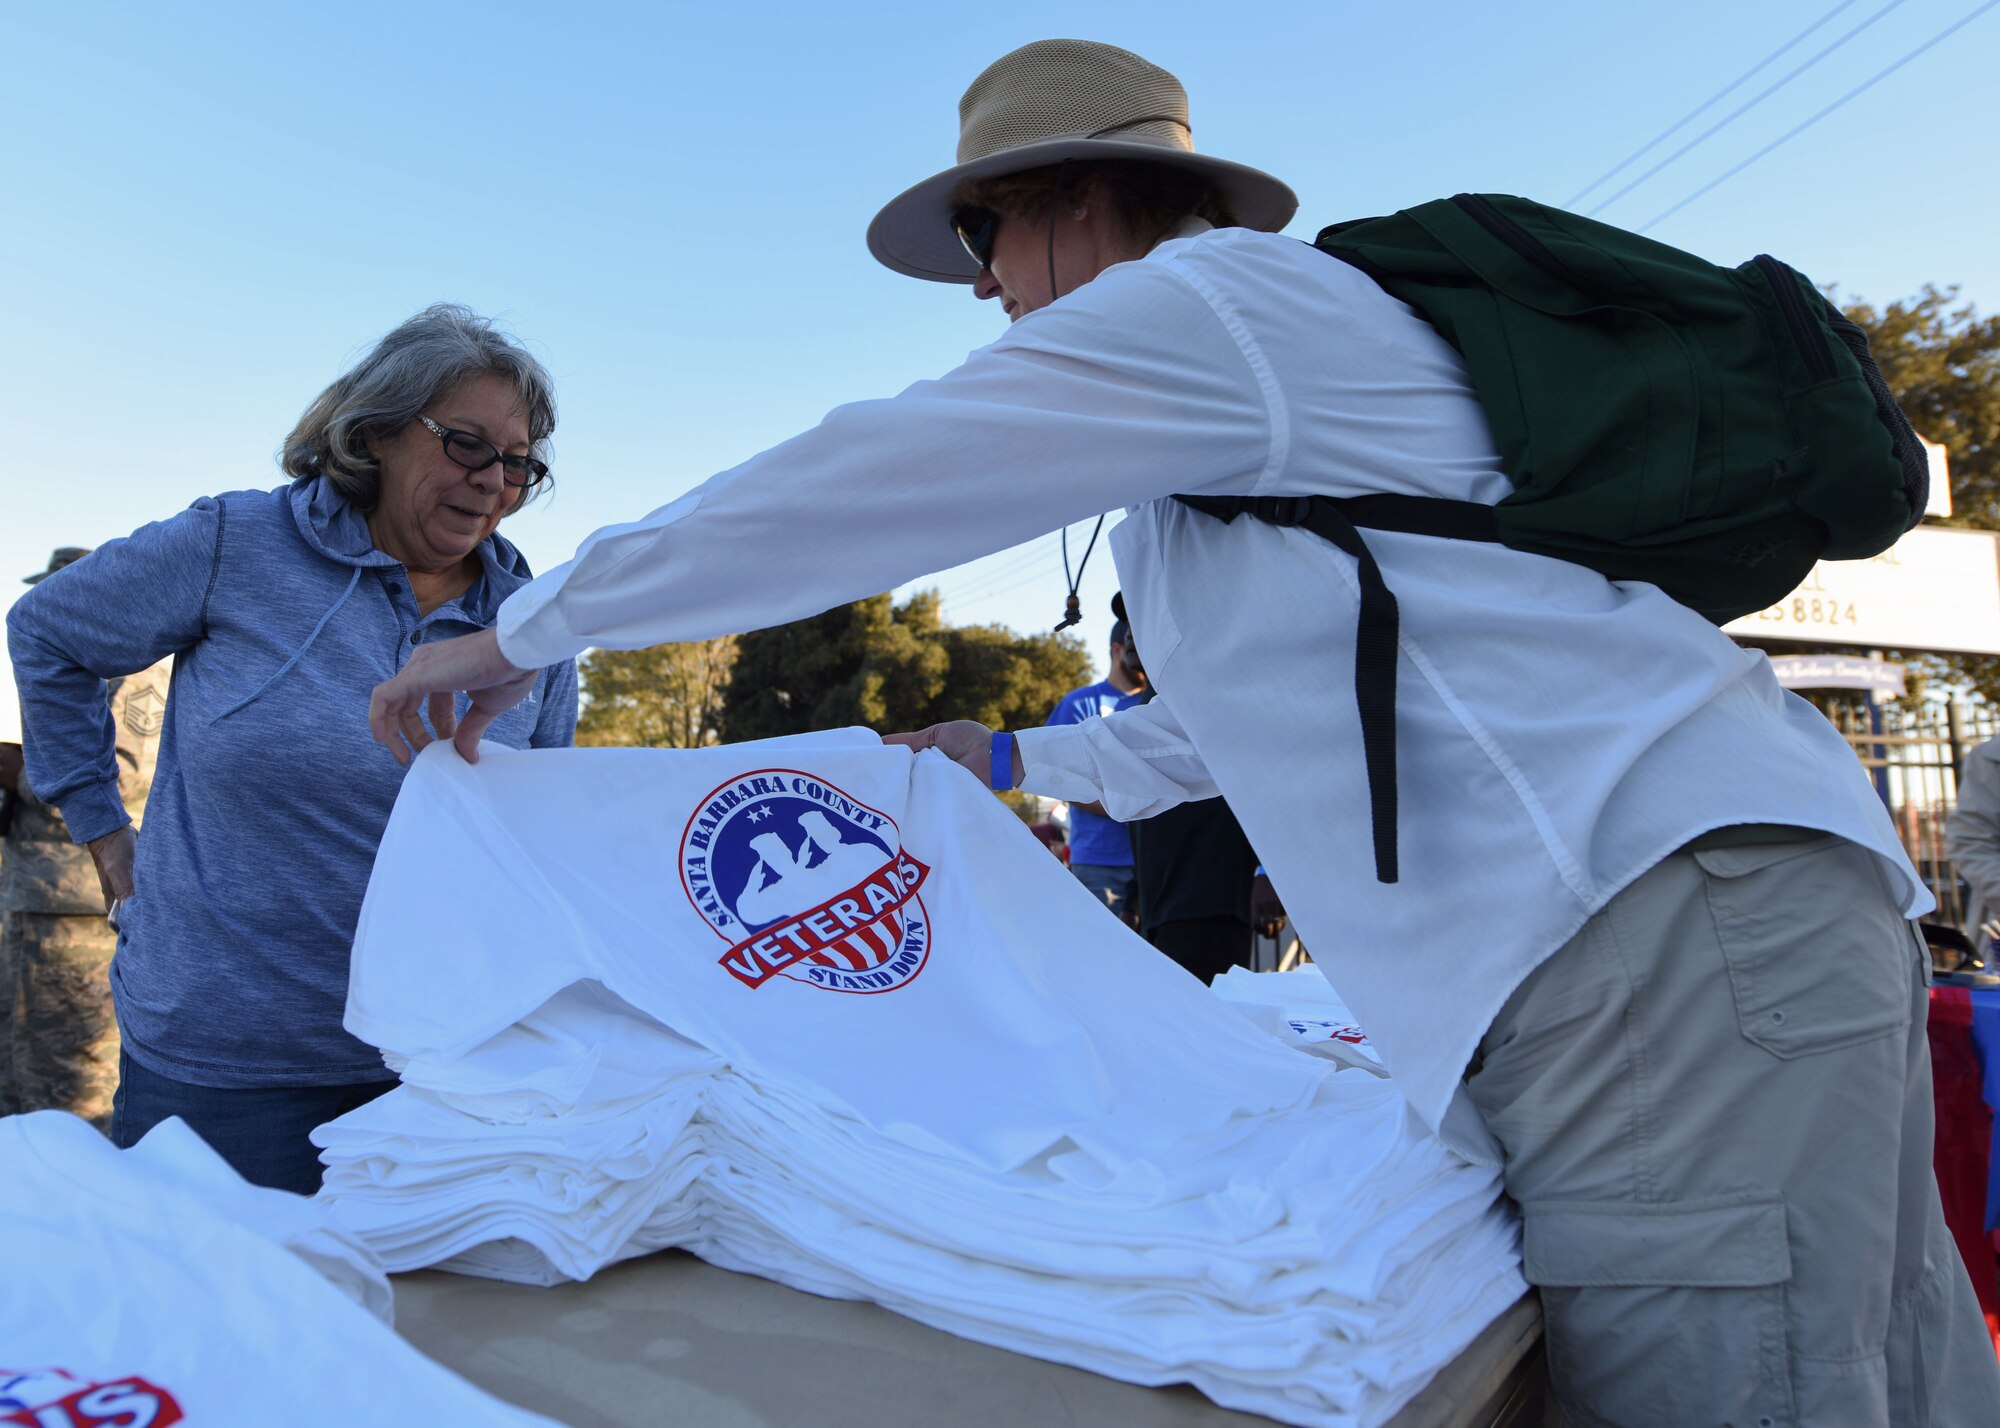 Volunteers at the Veteran Stand Down event get ready for the gates to open and begin assisting veterans Oct. 20, 2018 at Santa Maria Fair Grounds, Calif. The Stand Down is an annual county event that gives back to local veterans.